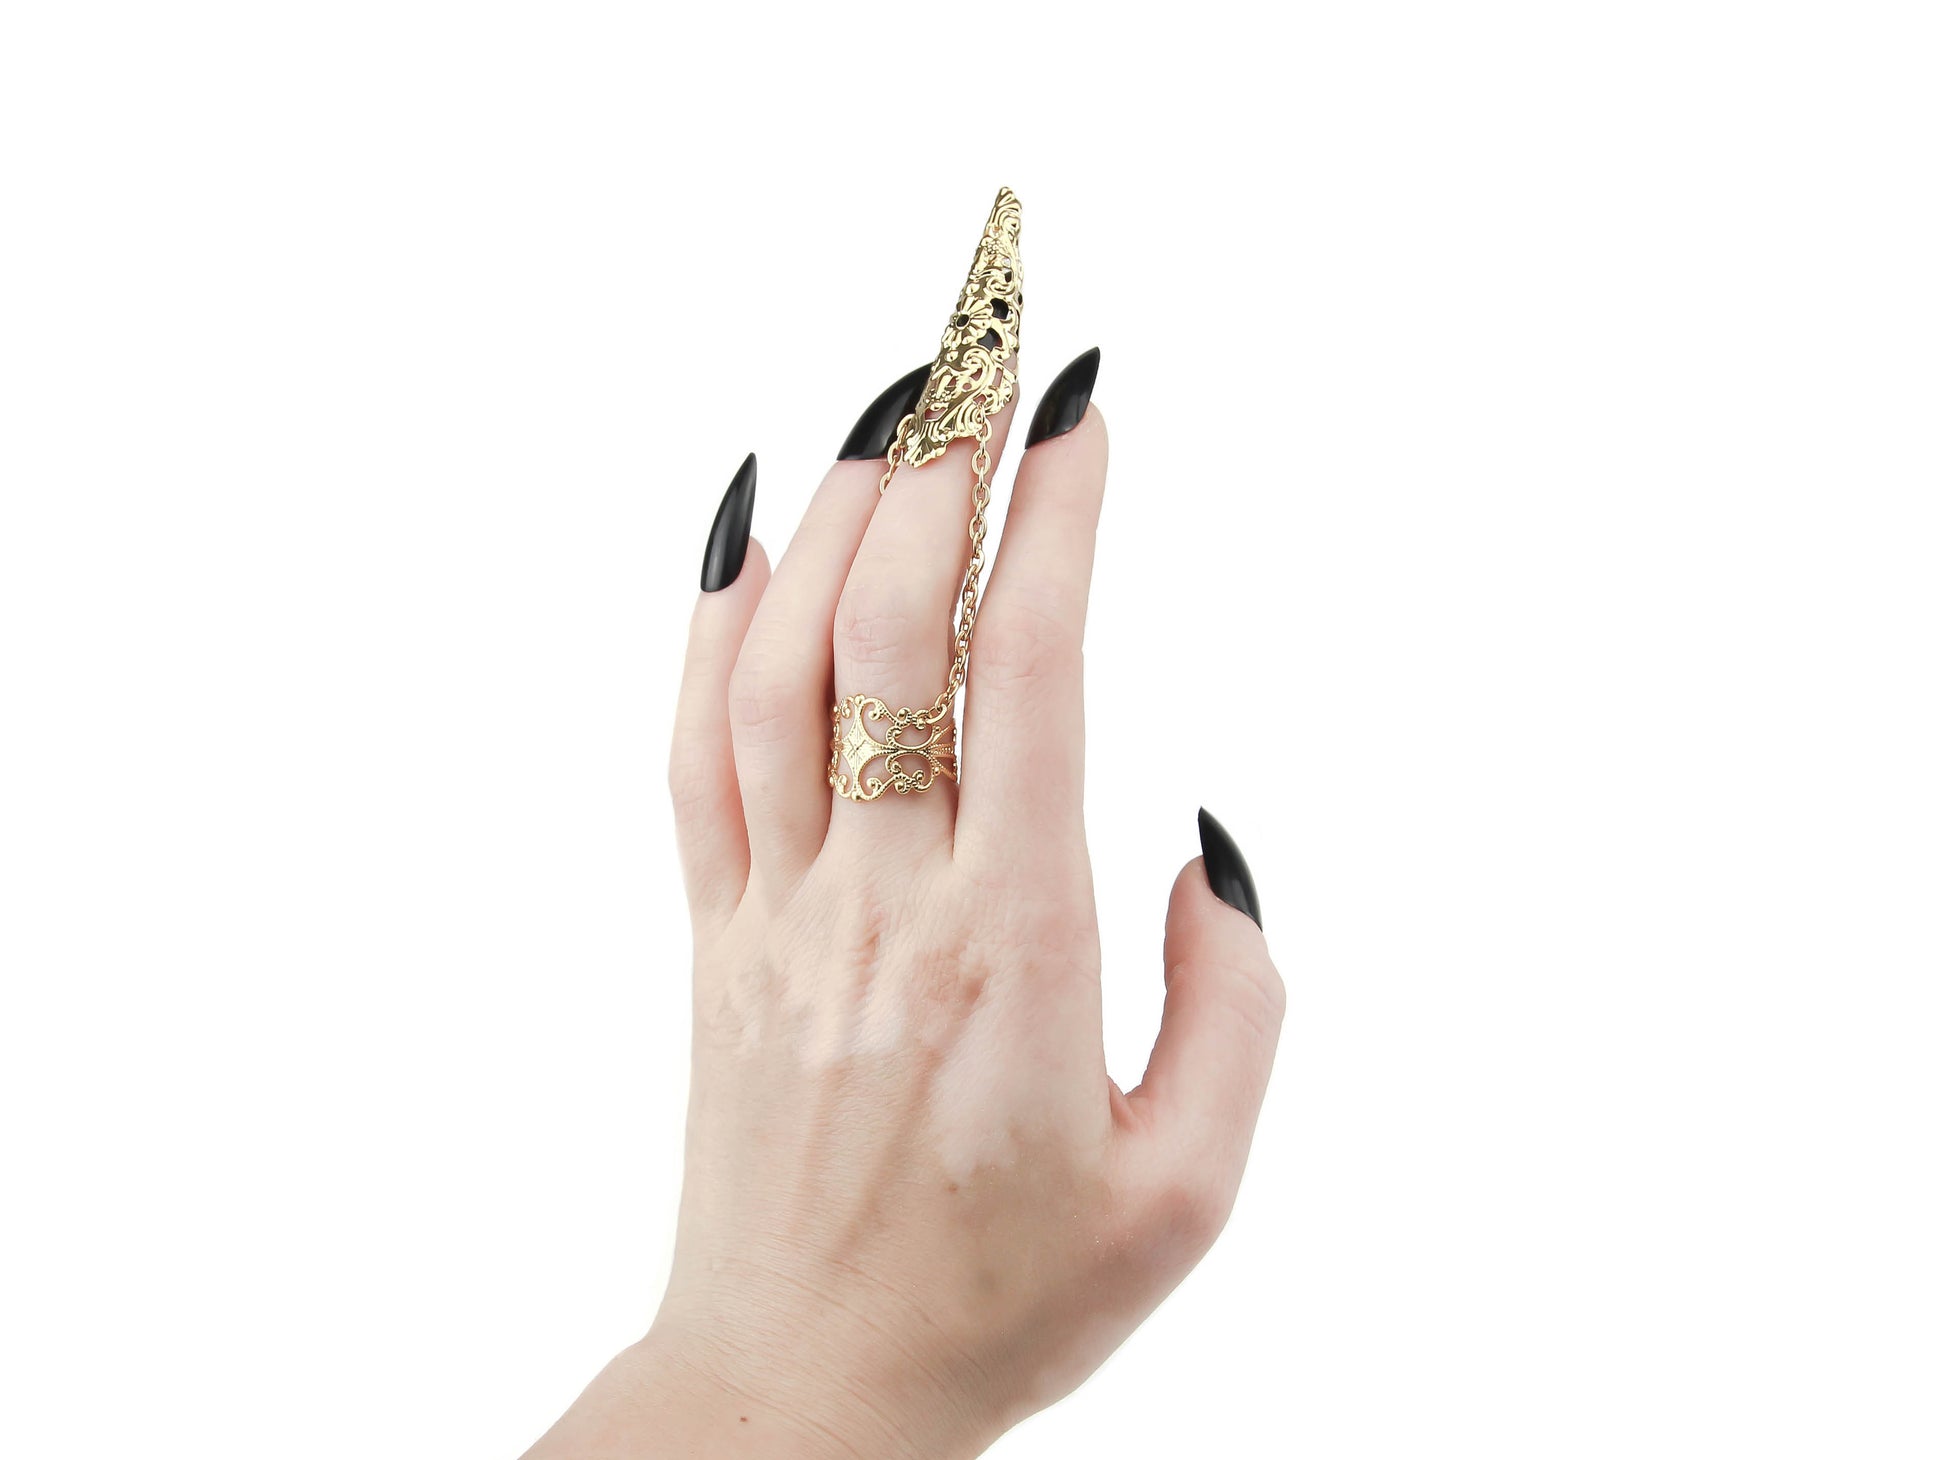 A hand adorned with Myril Jewels' exquisite gold armor ring with claw, featuring an elongated, ornate design connected by a delicate chain, is a statement of dark-avantgarde style. This piece captures the spirit of Neo Gothic and Gothic-chic, ideal for those with a love for gothic, Witchcore, and Whimsigoth aesthetics. It's a versatile accessory that enhances both Halloween ensembles and everyday wear